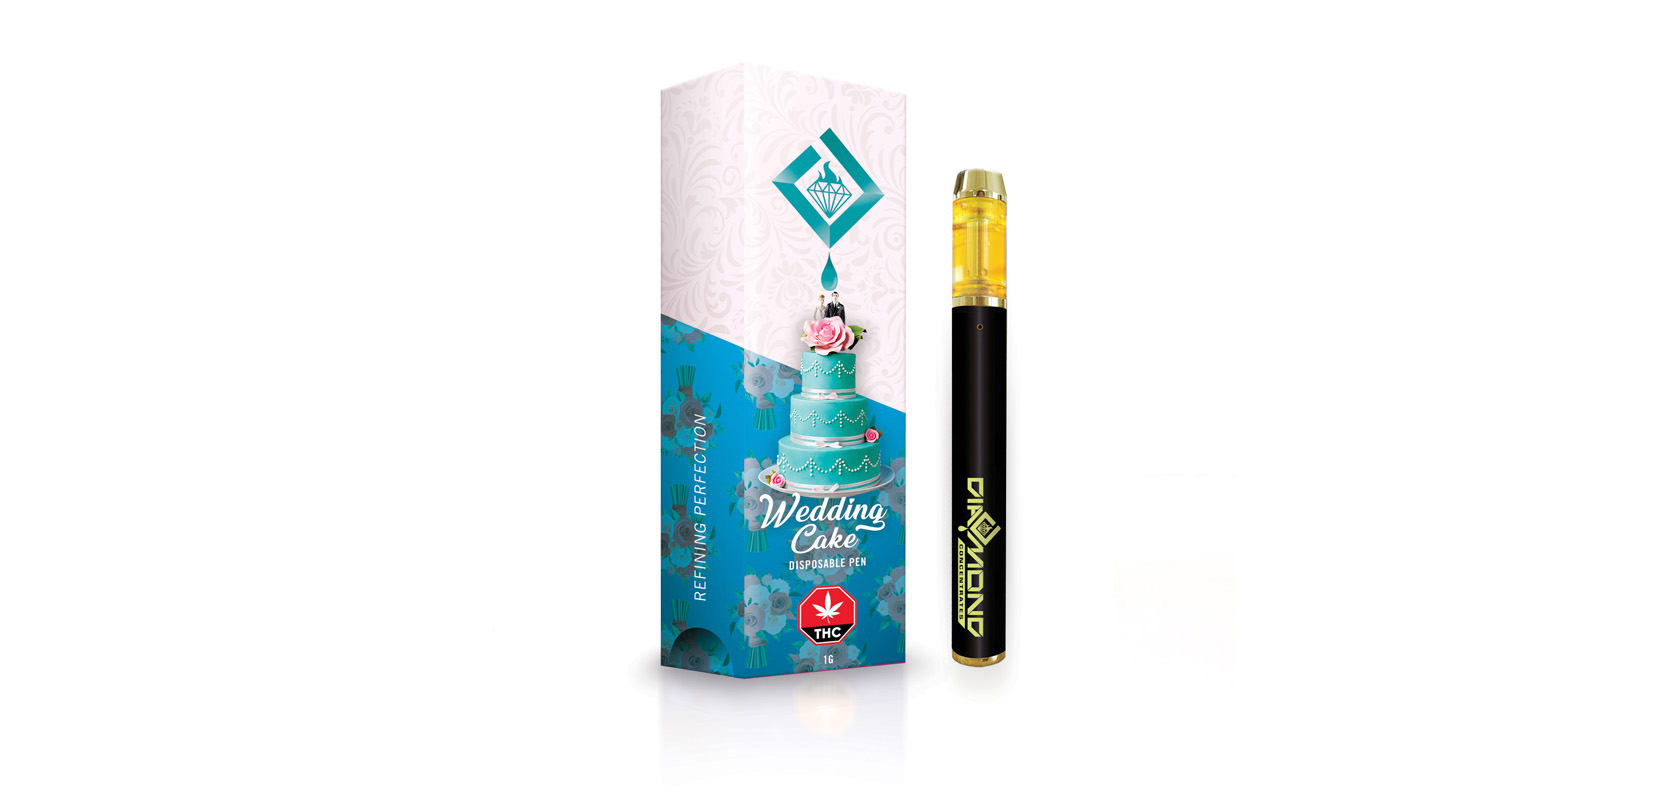 Diamond Concentrates Disposable Weed Vape Pen Wedding Cake strain. Buy online weeds. dispensary. buy weed online Canada.